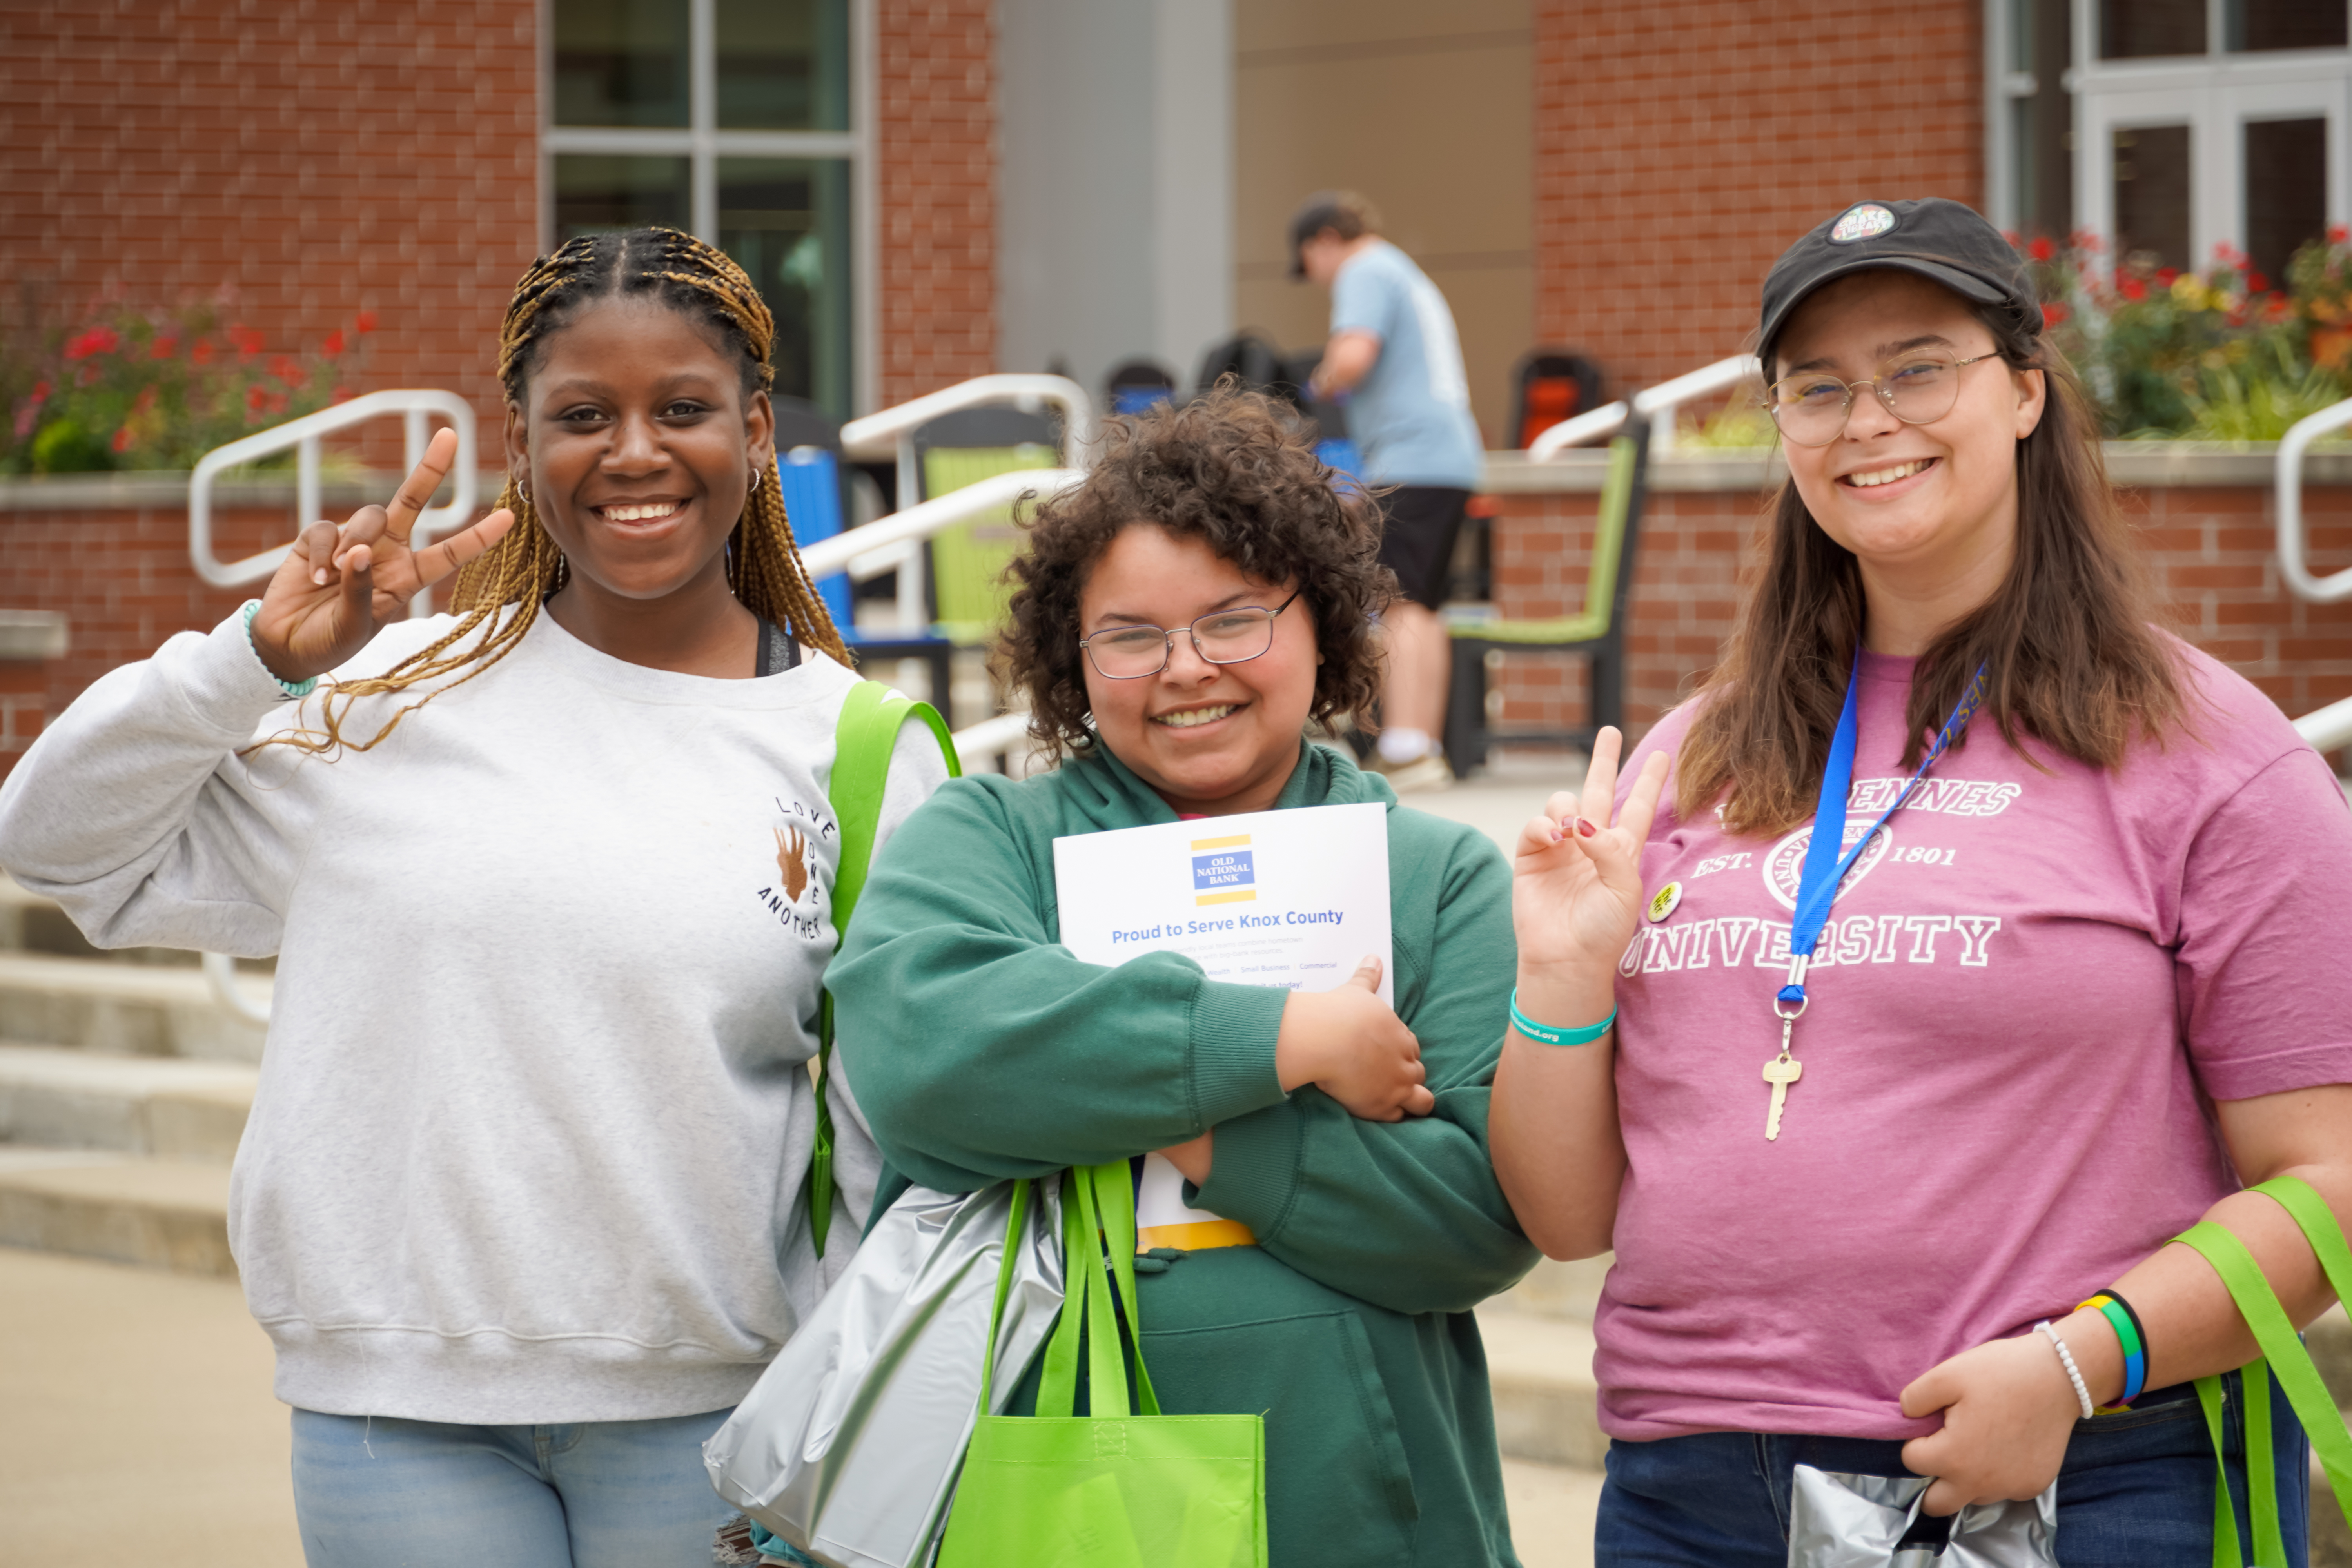 3 female students posing for a photo while smiling and 2 are flashing peace signs.